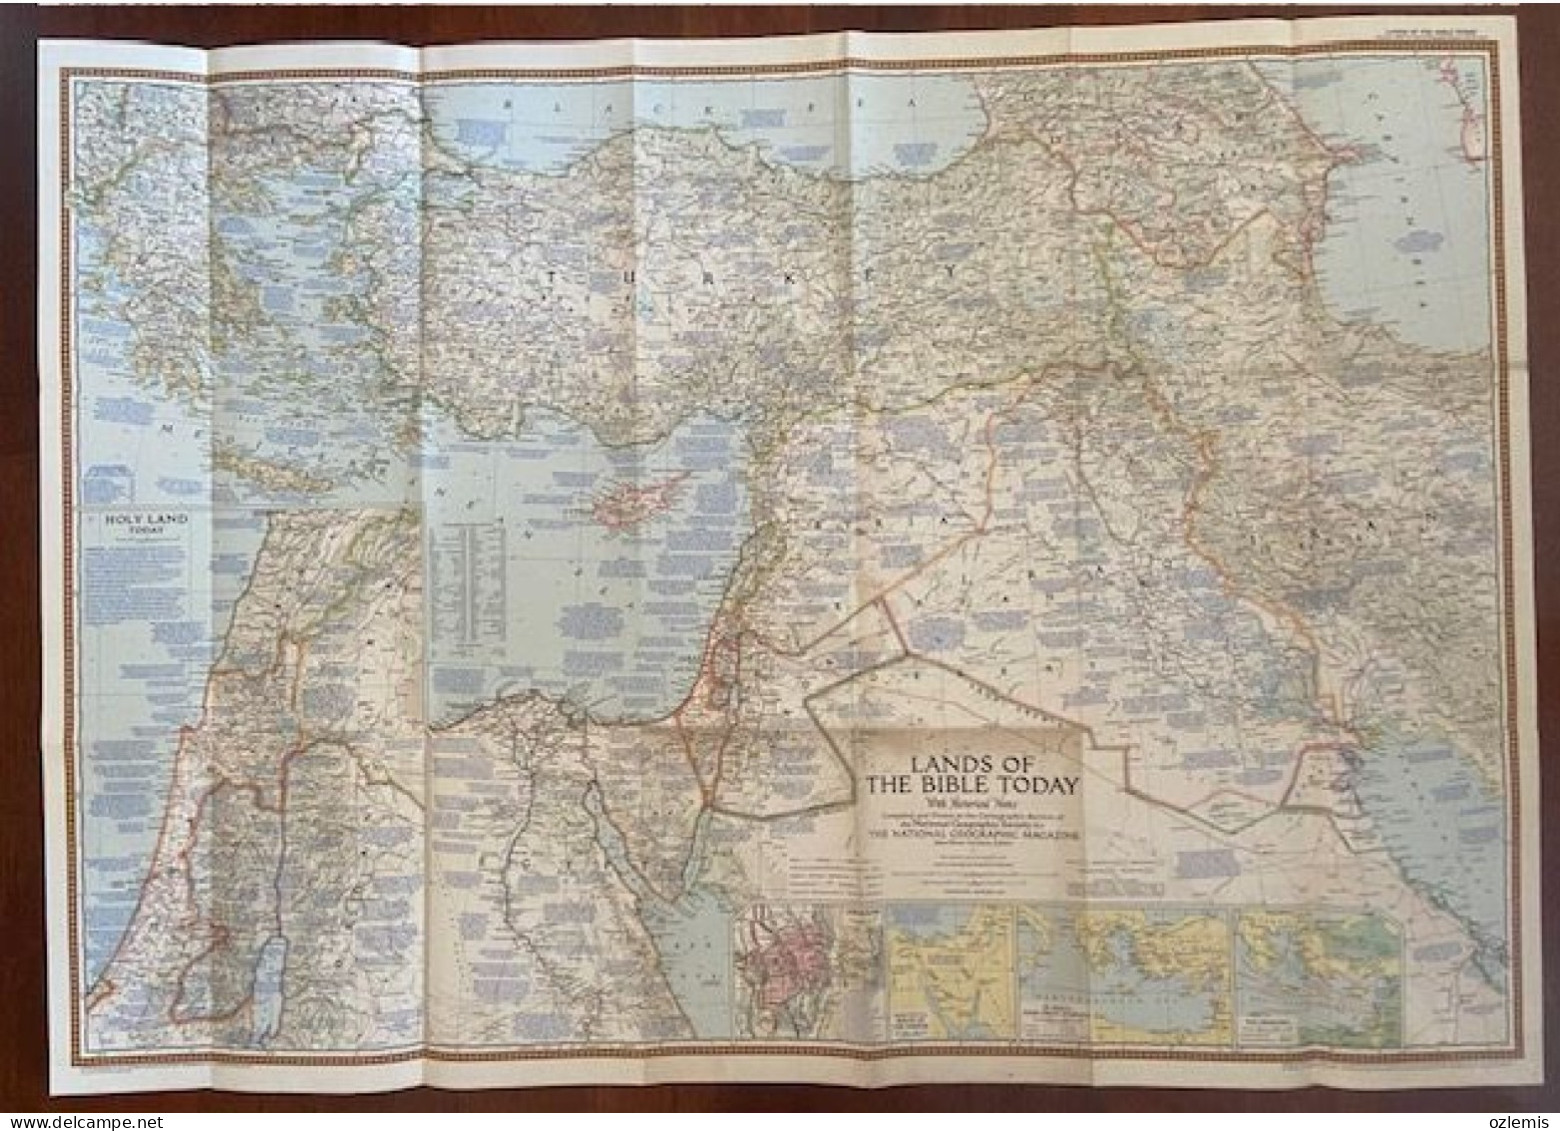 LANDS OF THE BIBLE TODAY WITH HISTORICAL NOTES ,THE NATIONAL GEOGRAPHIC MAGAZINE ,1956 ,MAP - Atlas, Mapas